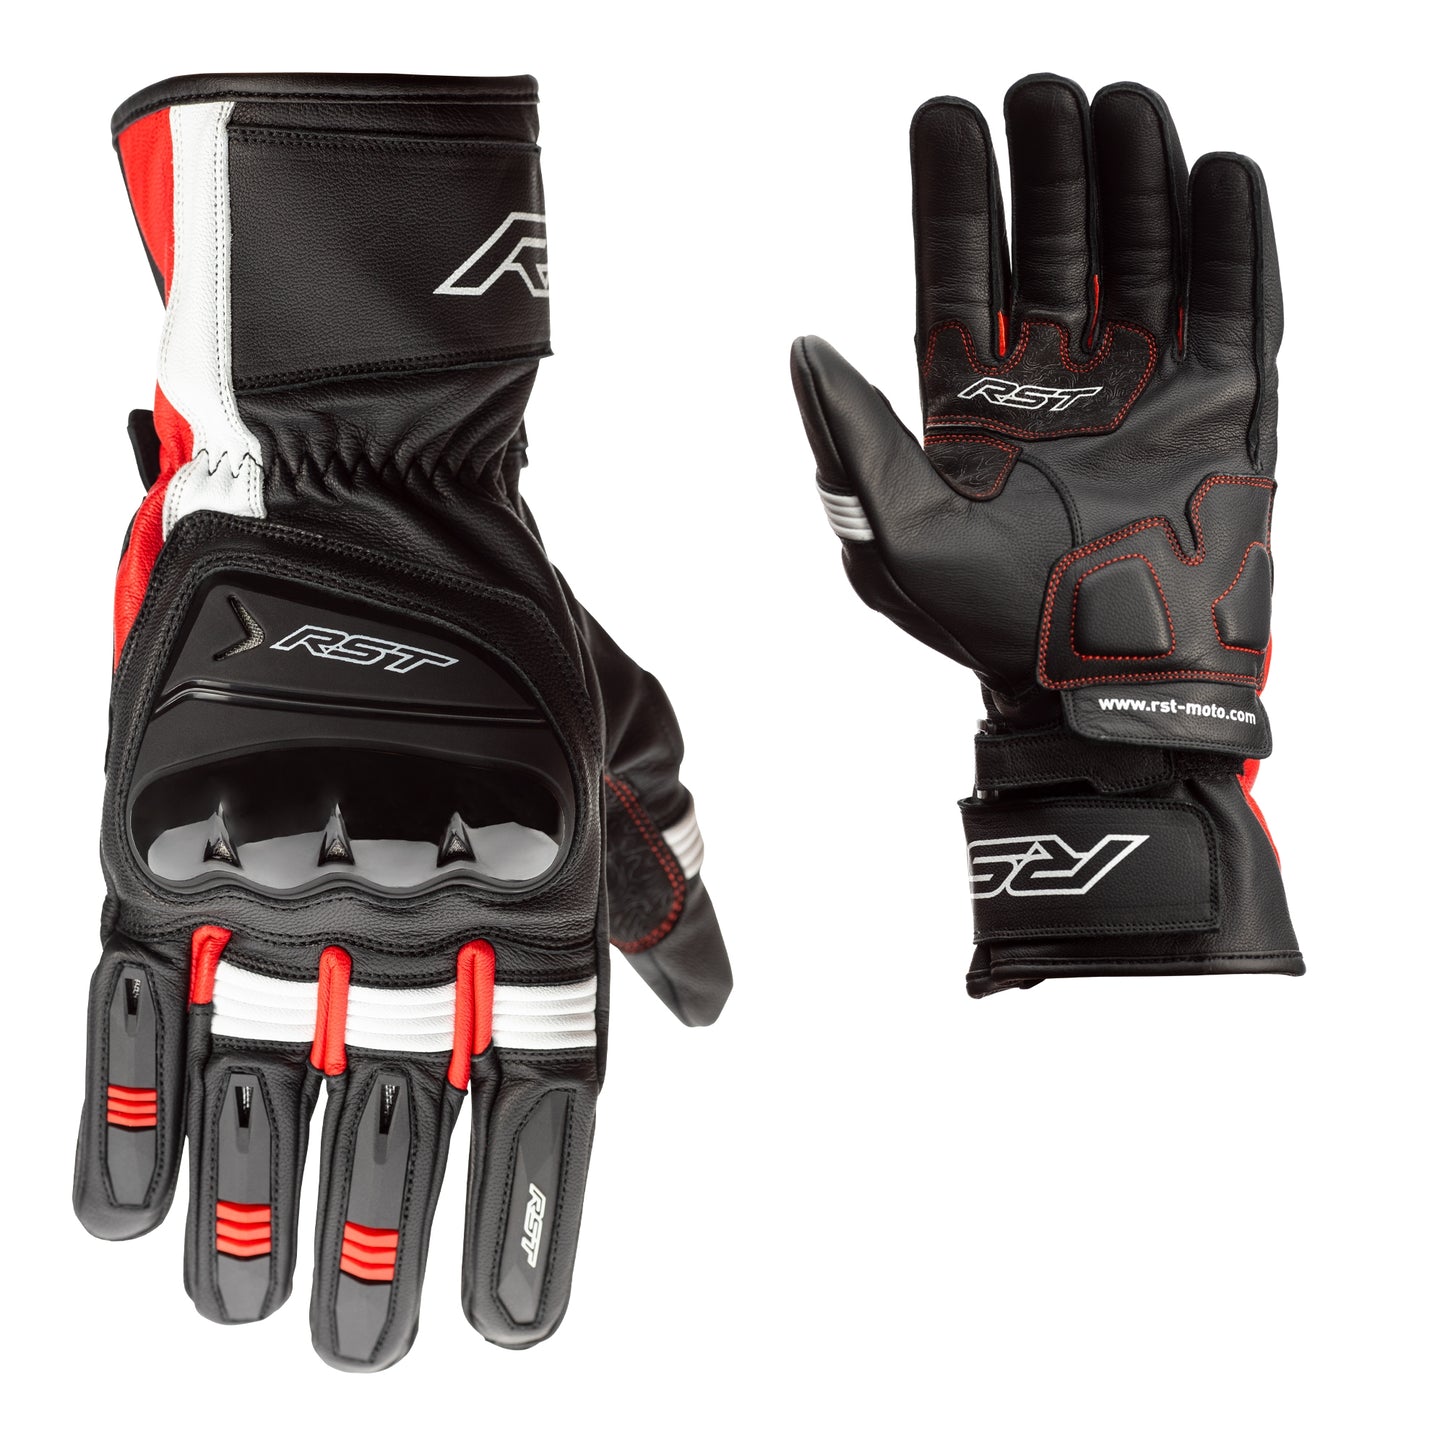 RST Pilot Leather Riding Gloves - CE APPROVED - Black/Red/White